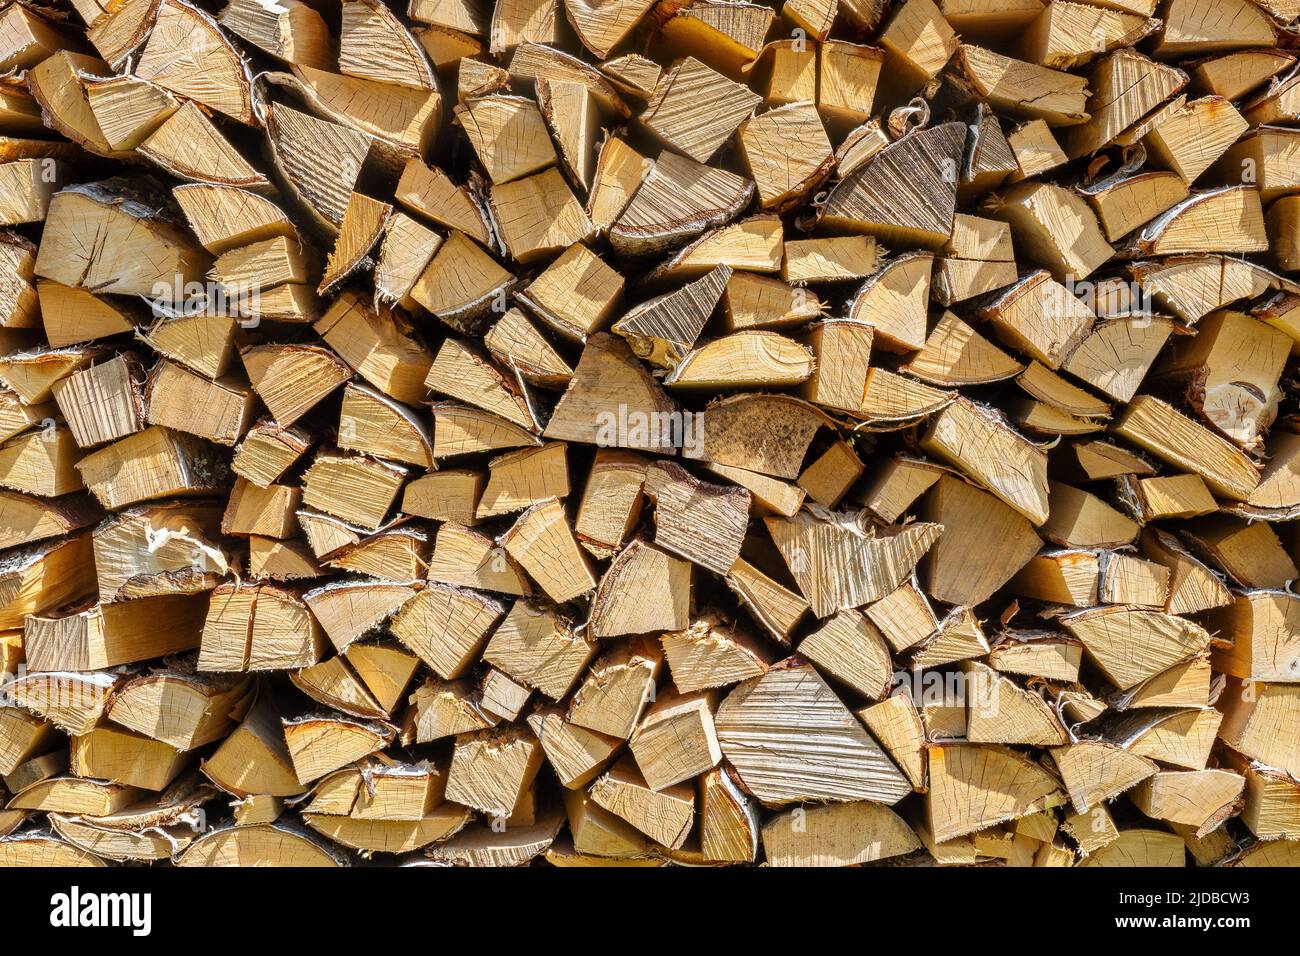 Wall of chopped and stacked firewood Stock Photo